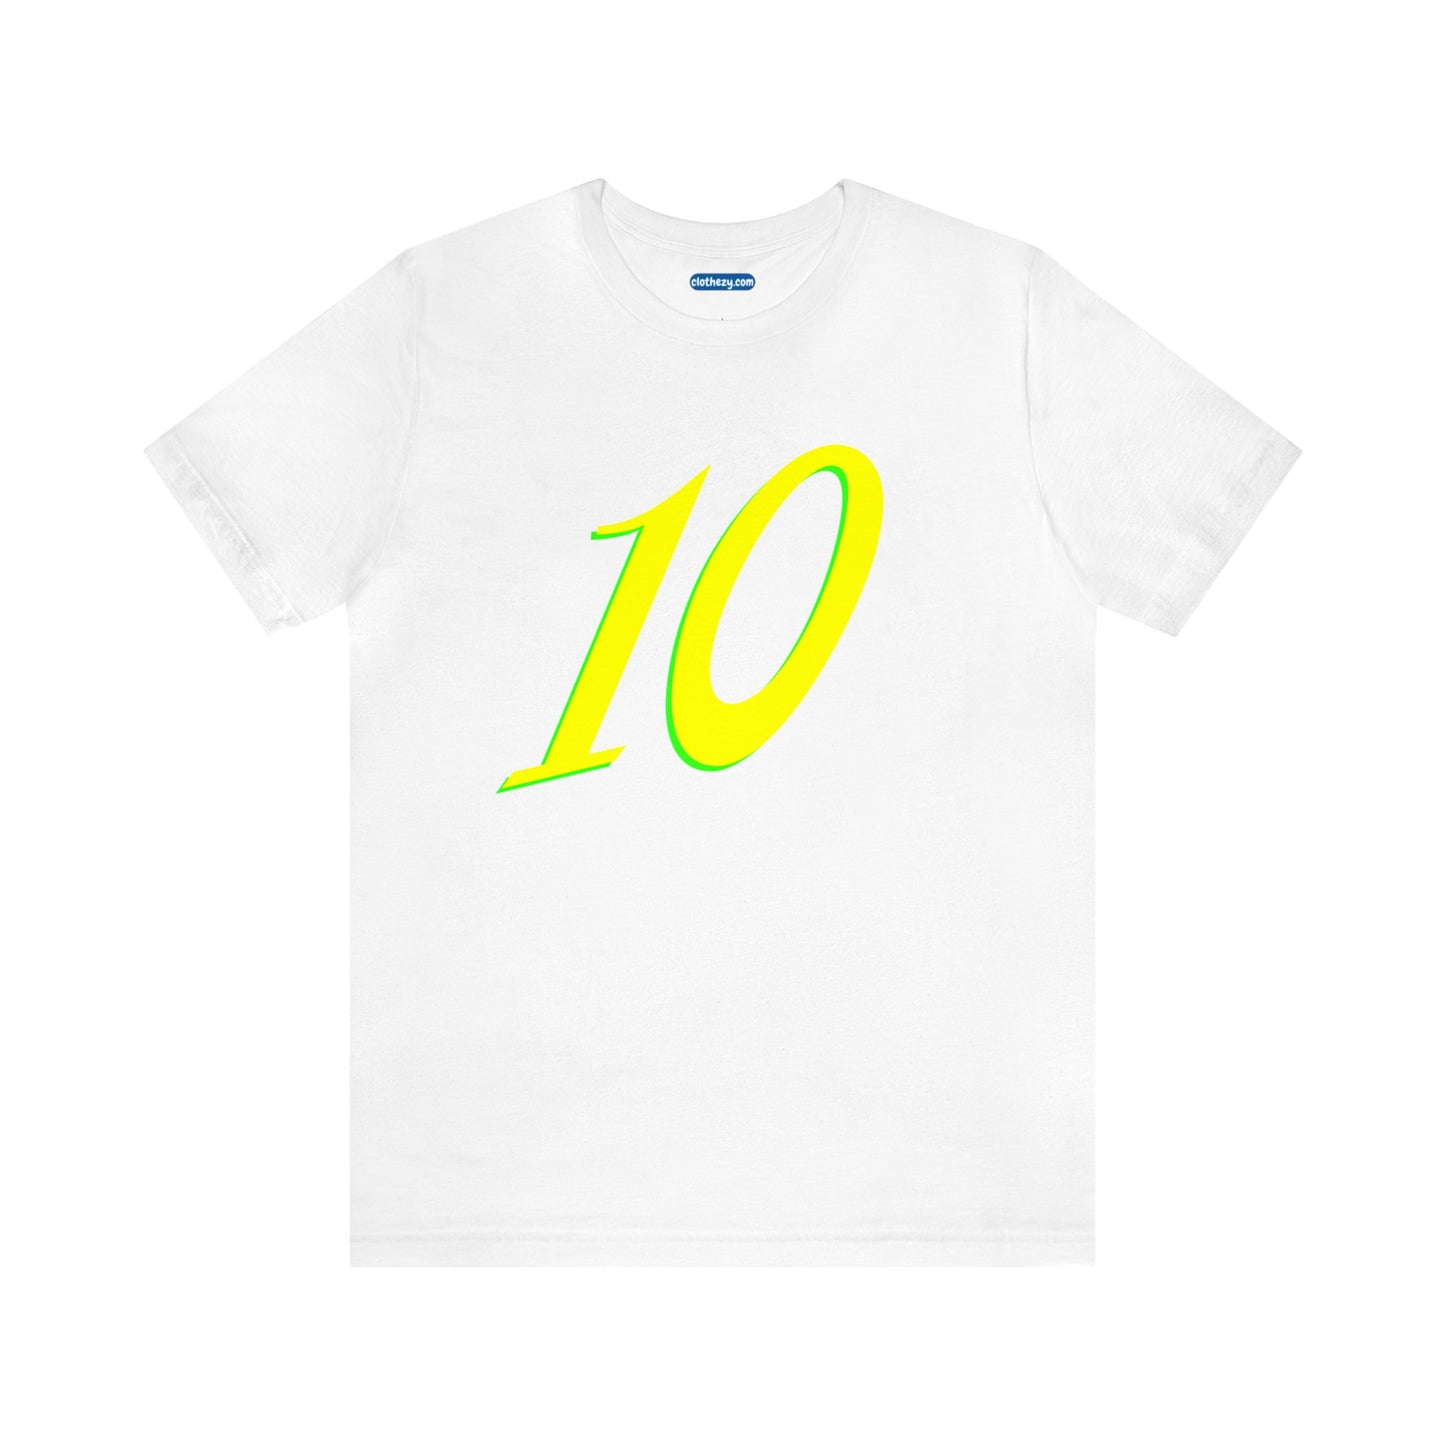 Number 10 Design - Soft Cotton Tee for birthdays and celebrations, Gift for friends and family, Multiple Options by clothezy.com in White Size Small - Buy Now